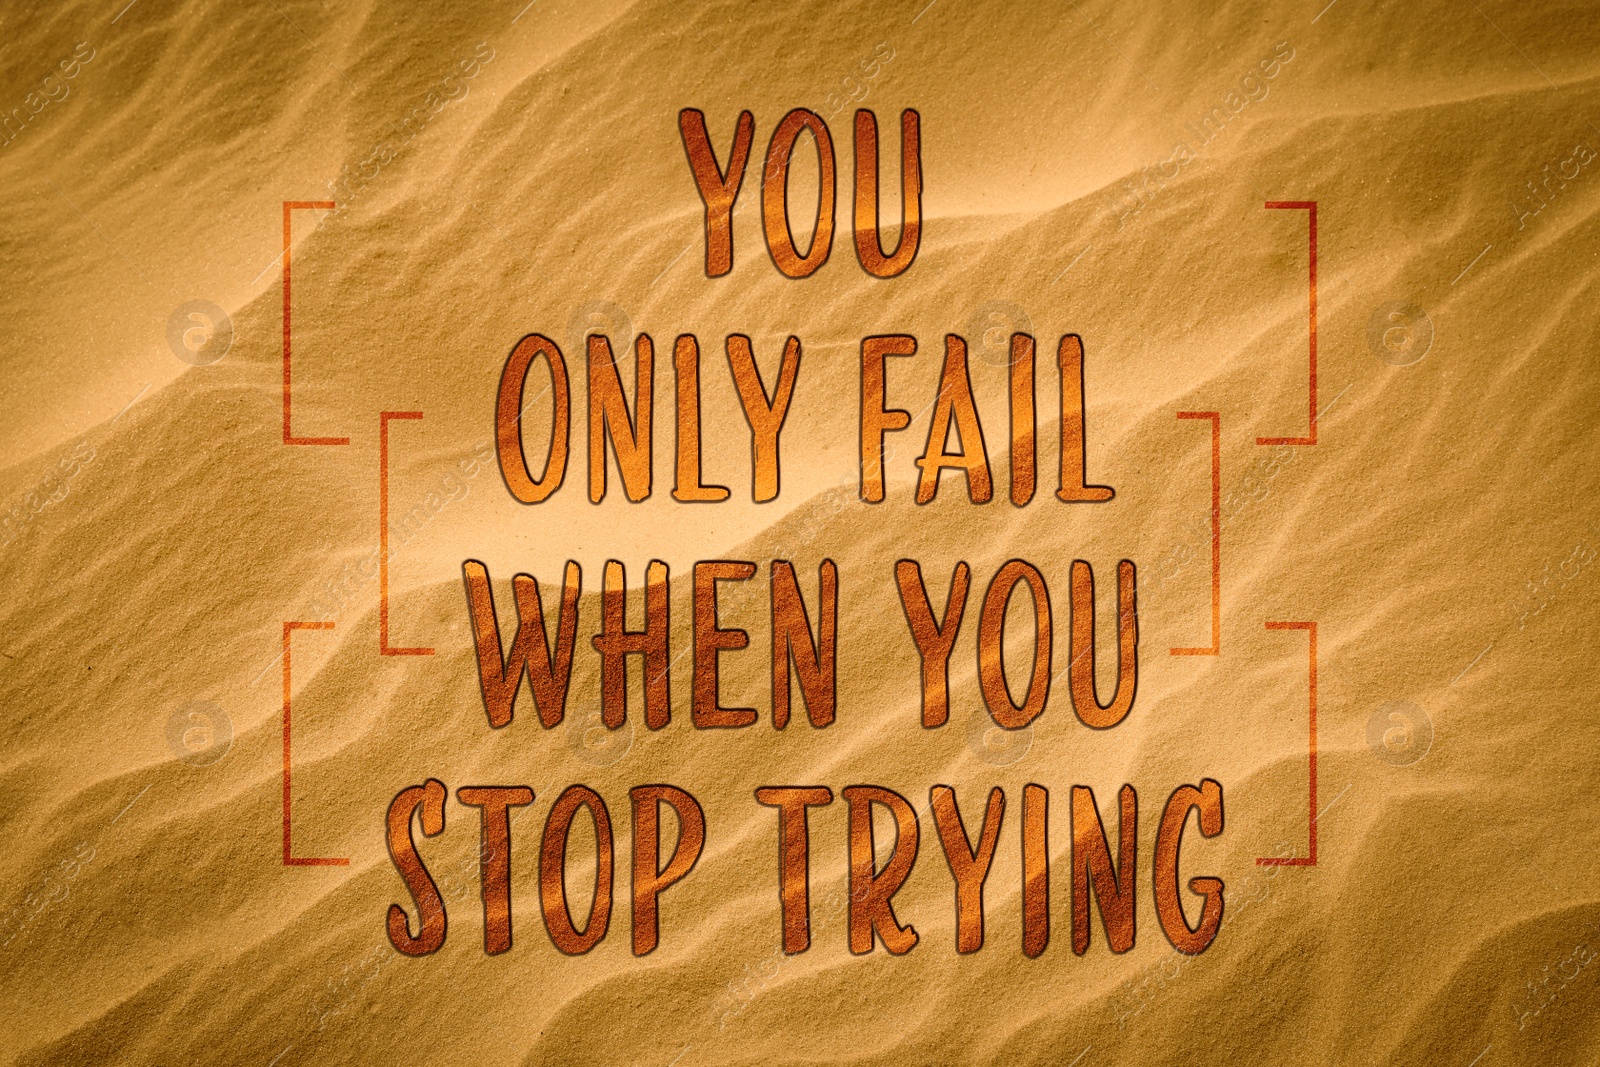 Image of You Only Fail When You Stop Trying. Inspirational quote motivating not to despair and keep on moving forward. Text on sand